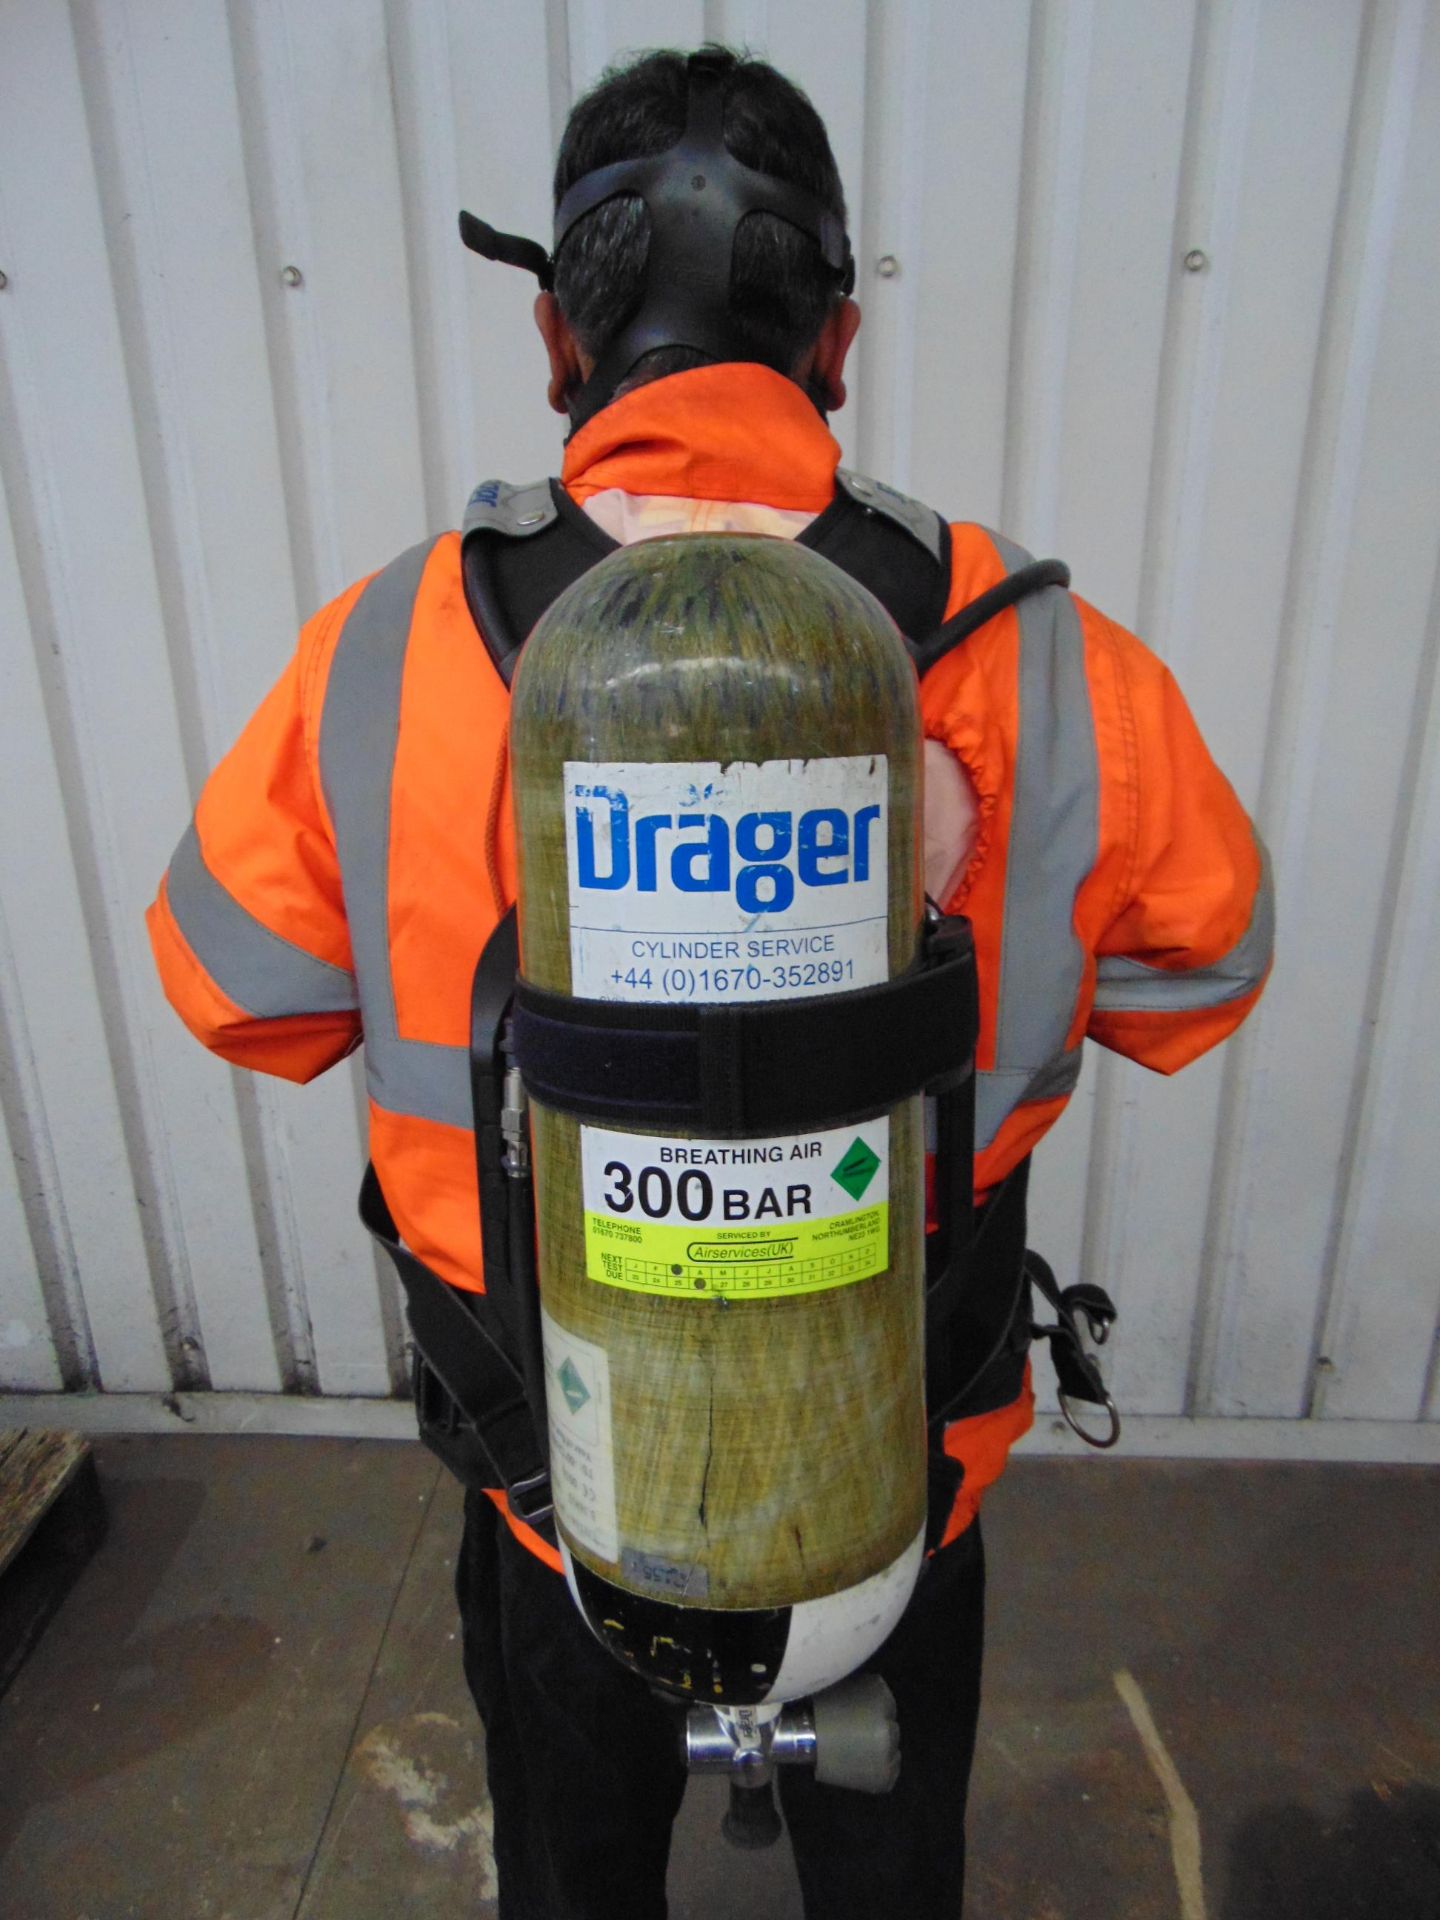 Drager PSS 7000 Self Contained Breathing Apparatus w/ 2 x Drager 300 Bar Air Cylinders - Image 16 of 17